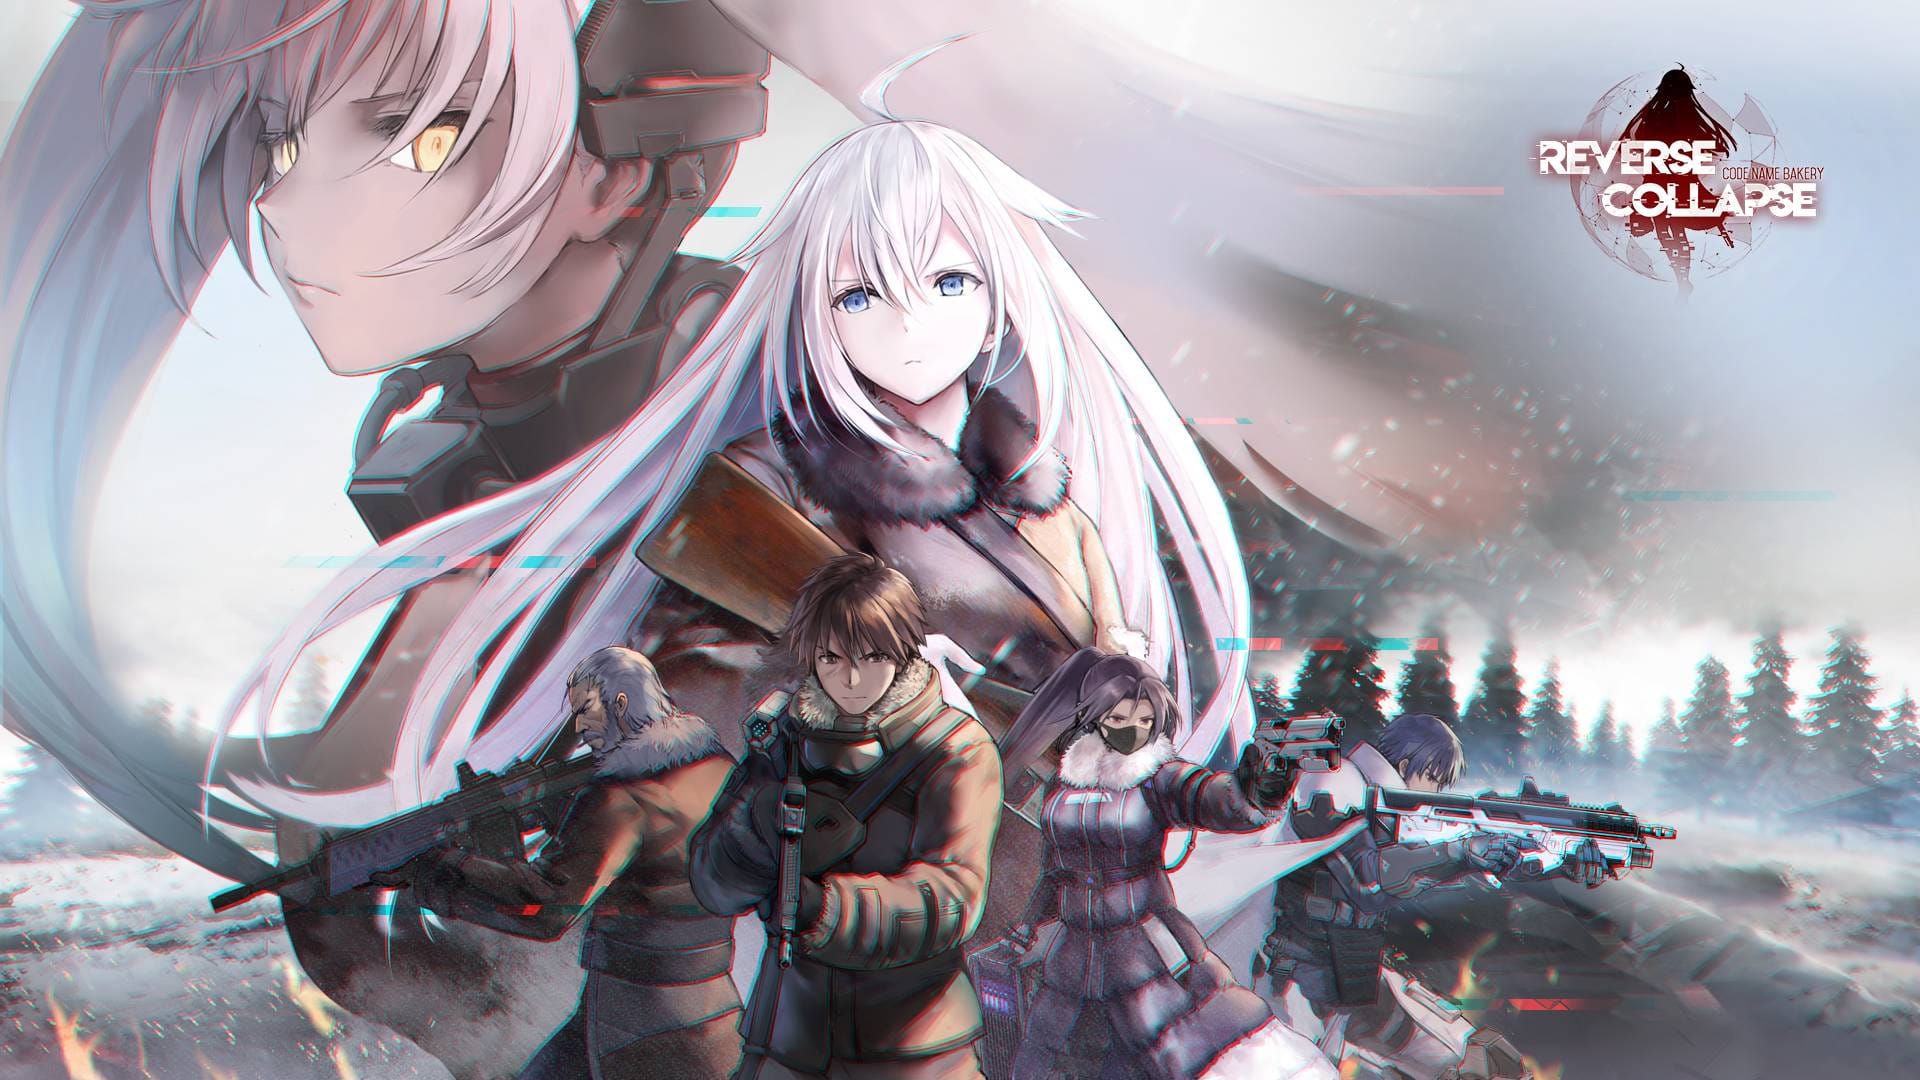 Girls’ Frontline Tactical RPG Reverse Collapse: Code Name Bakery Reveals Release Date